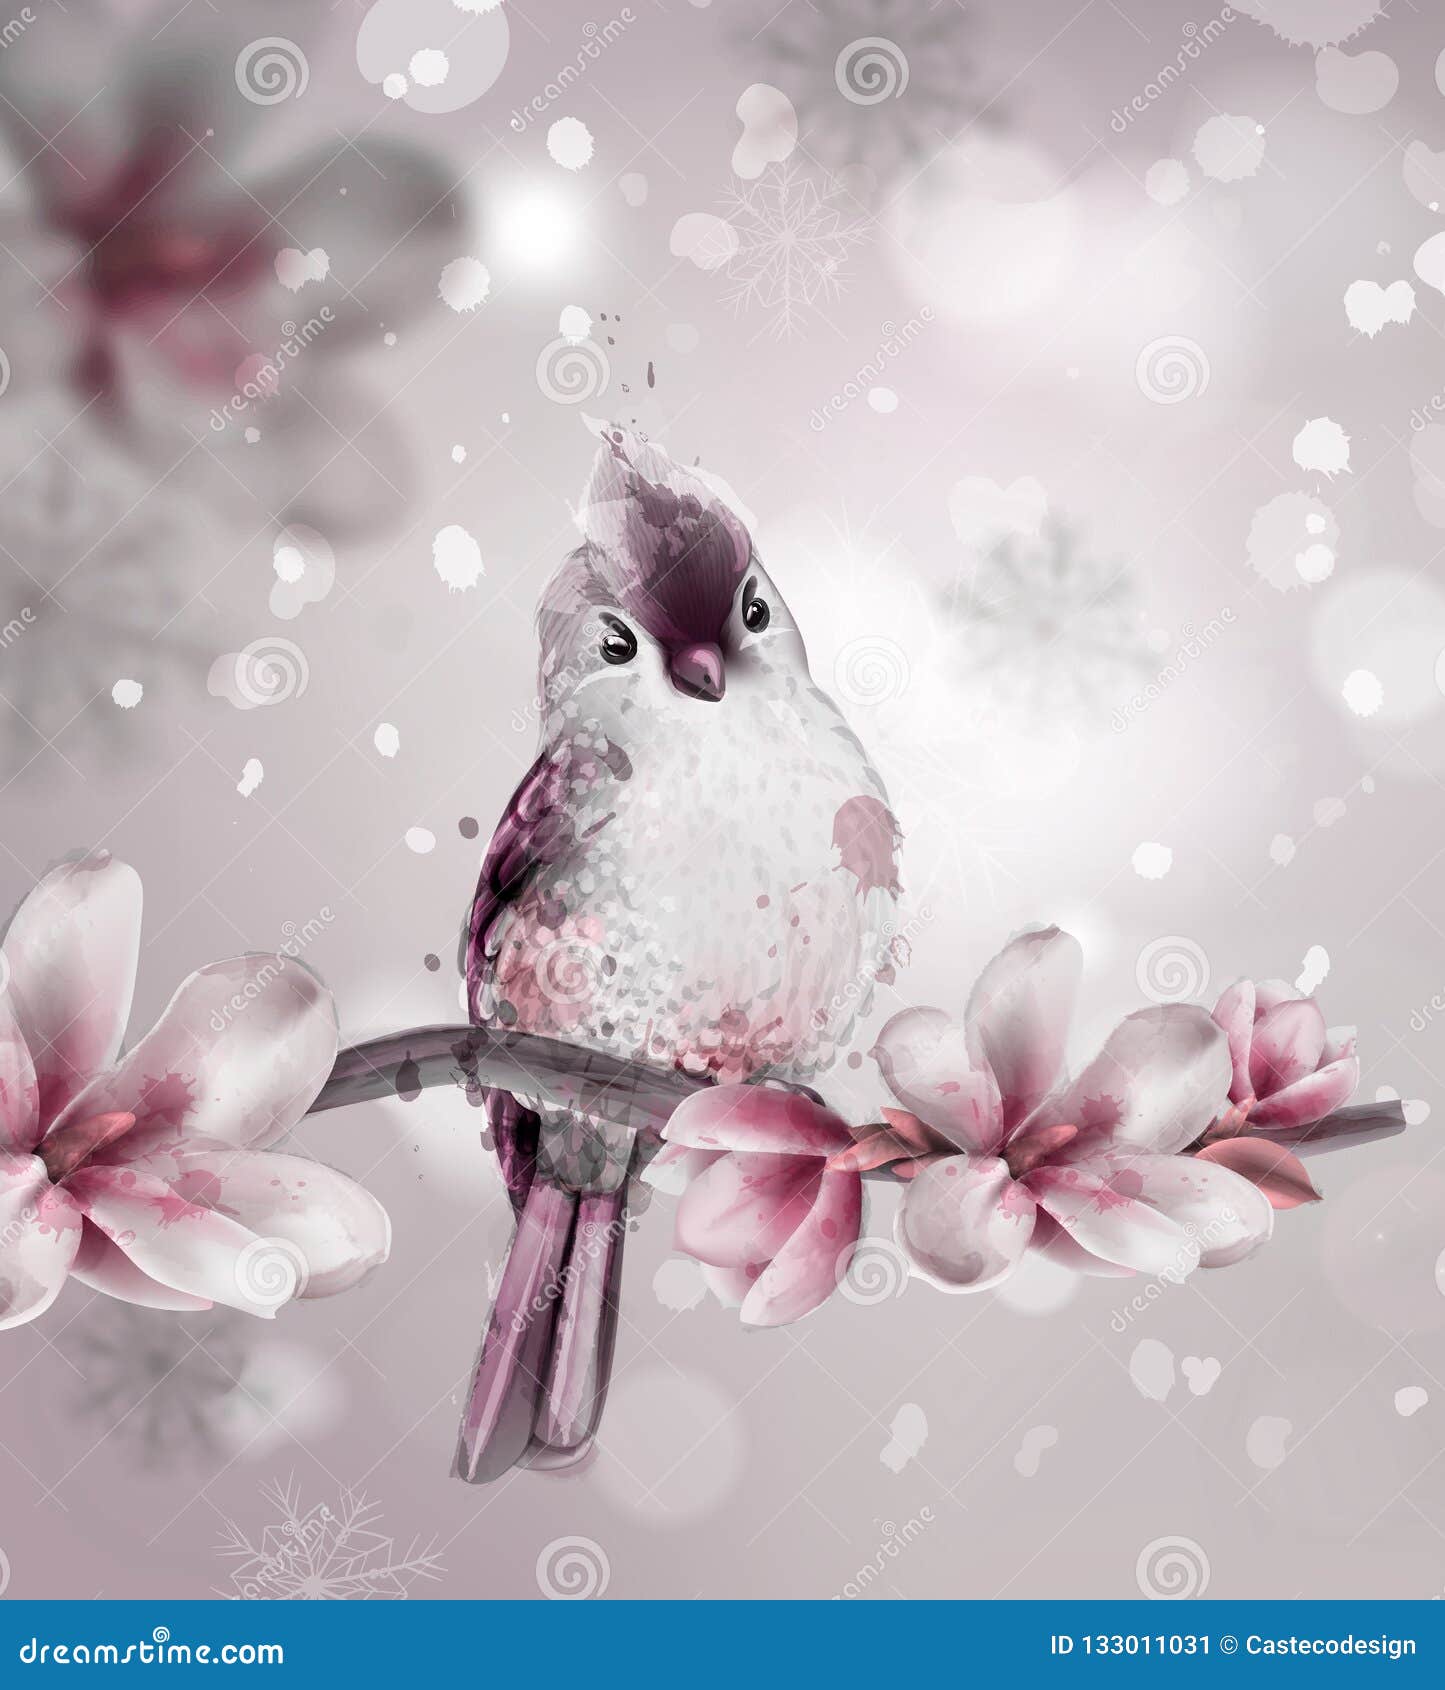 Cute Pink Bird on a Branch with Magnolia Flowers Vector. Watercolor Beautiful  Backgrounds Stock Vector - Illustration of decoration, chic: 133011031